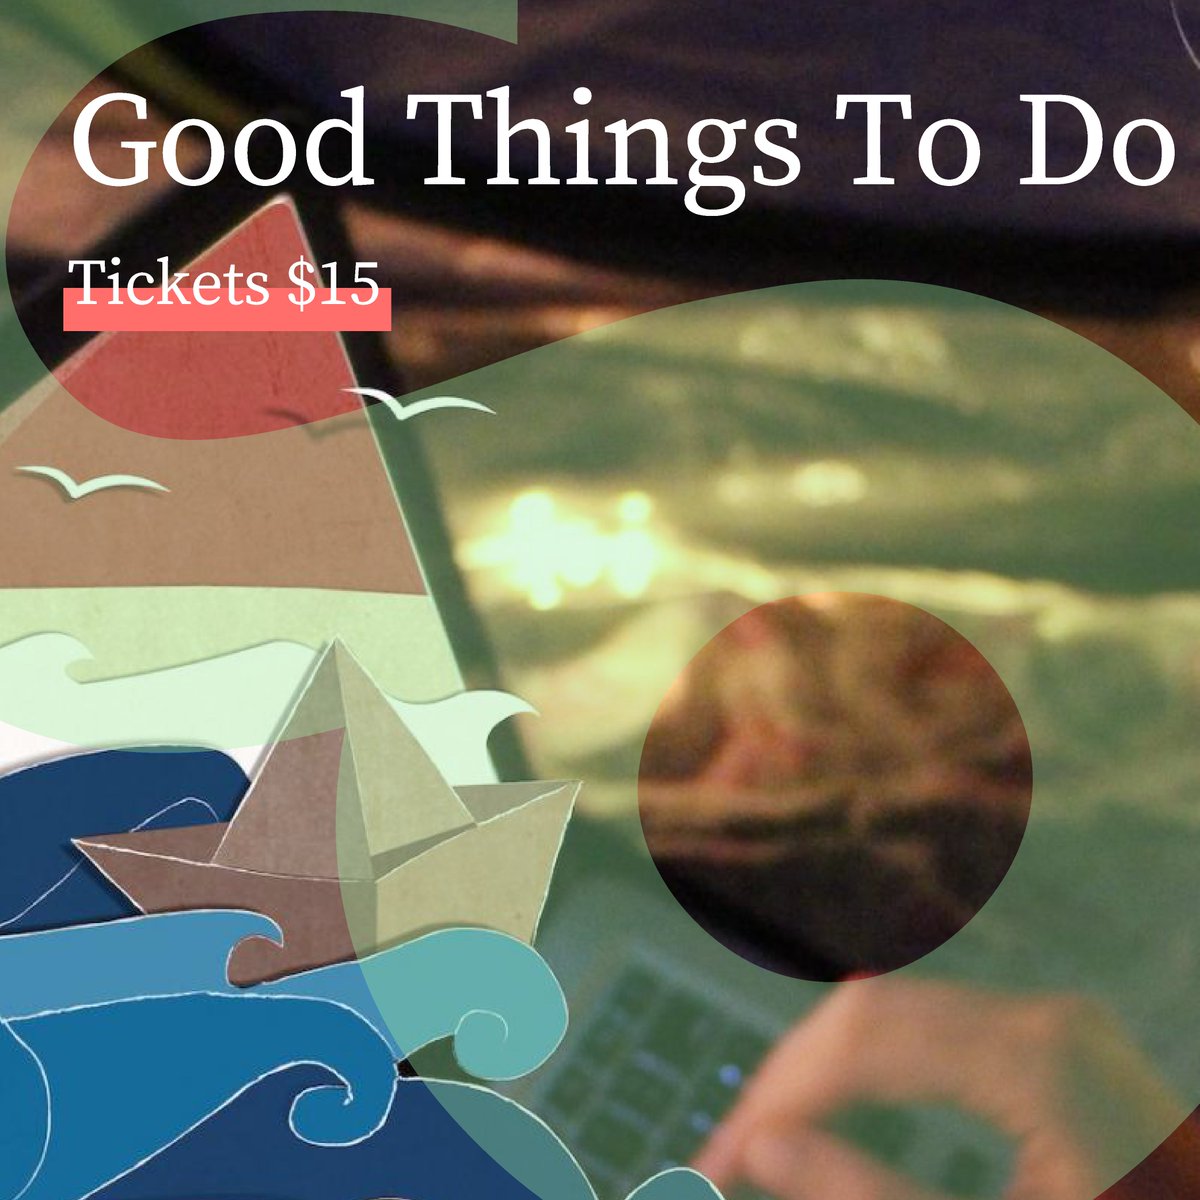 GOOD THINGS TO DO opens this Saturday! Tickets are $15, with only 12 virtual seats, and shows are selling out! Don’t miss this immersive, intimate, solitary, cozy meditation.